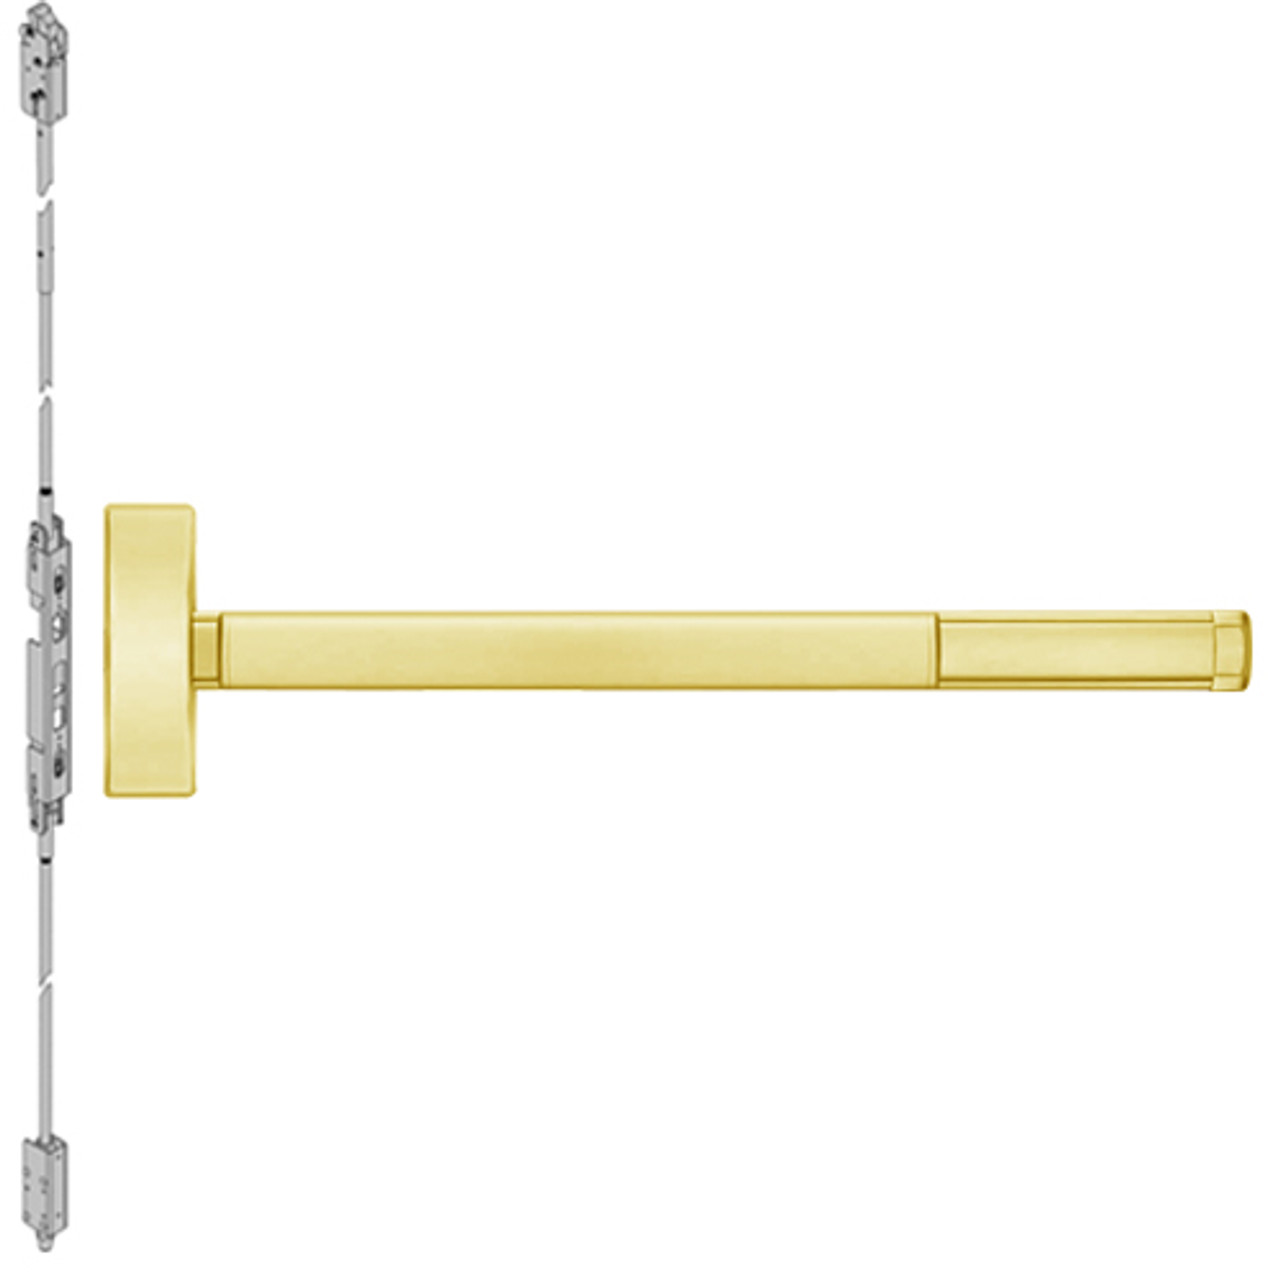 2801LBRCD-605-48 PHI 2800 Series Non Fire Rated Concealed Vertical Rod Exit Device Prepped for Cover Plate in Bright Brass Finish